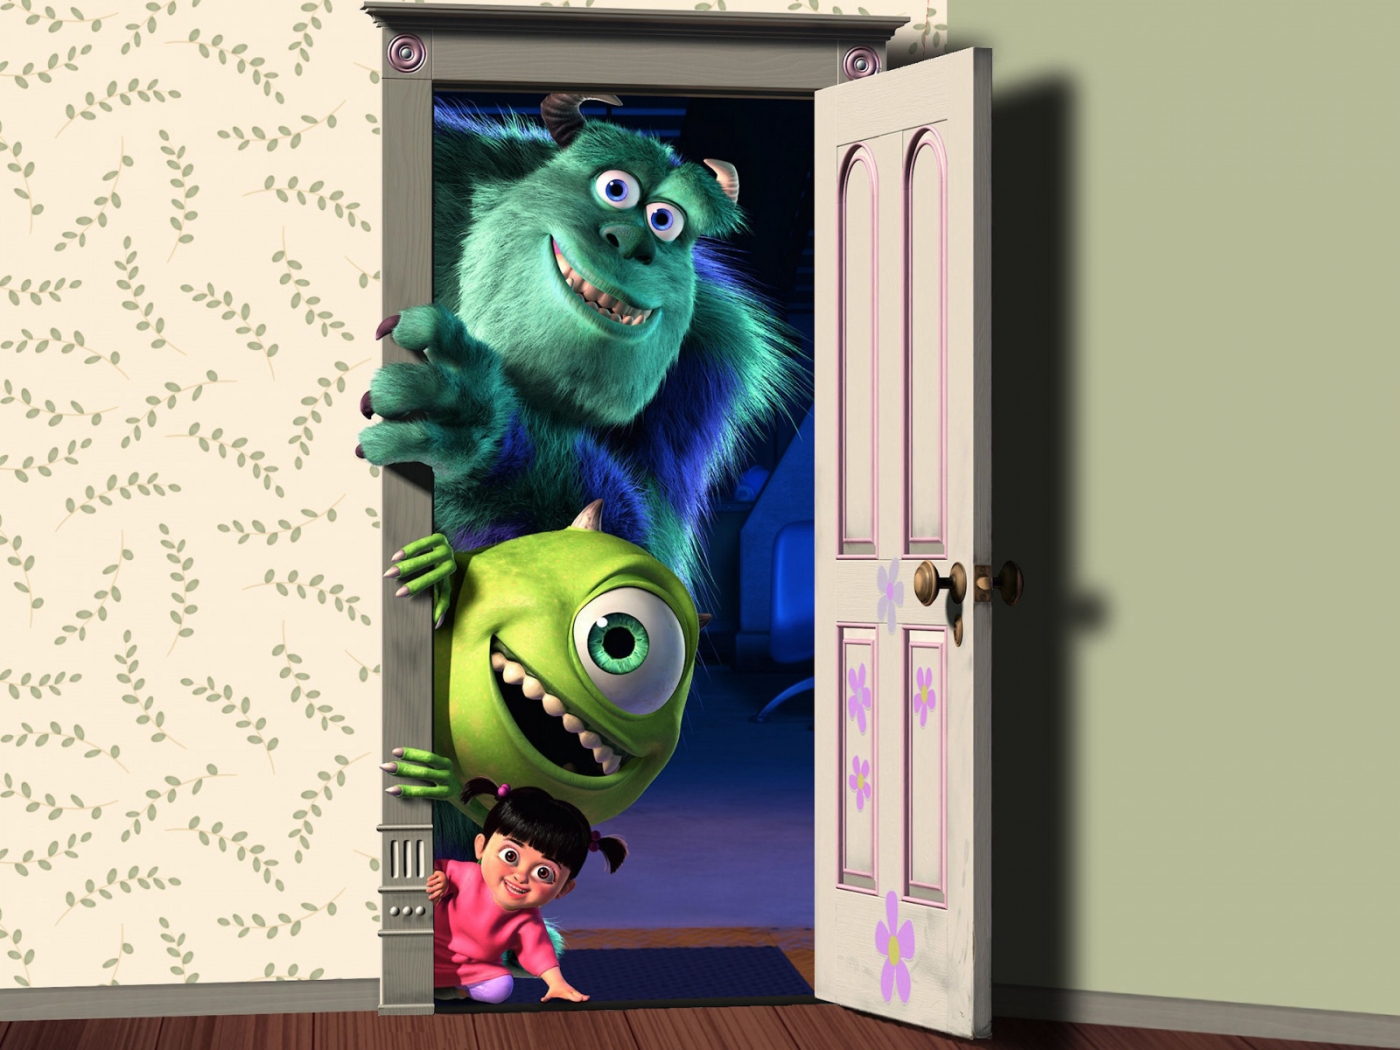 monsters, cartoon High Definition image